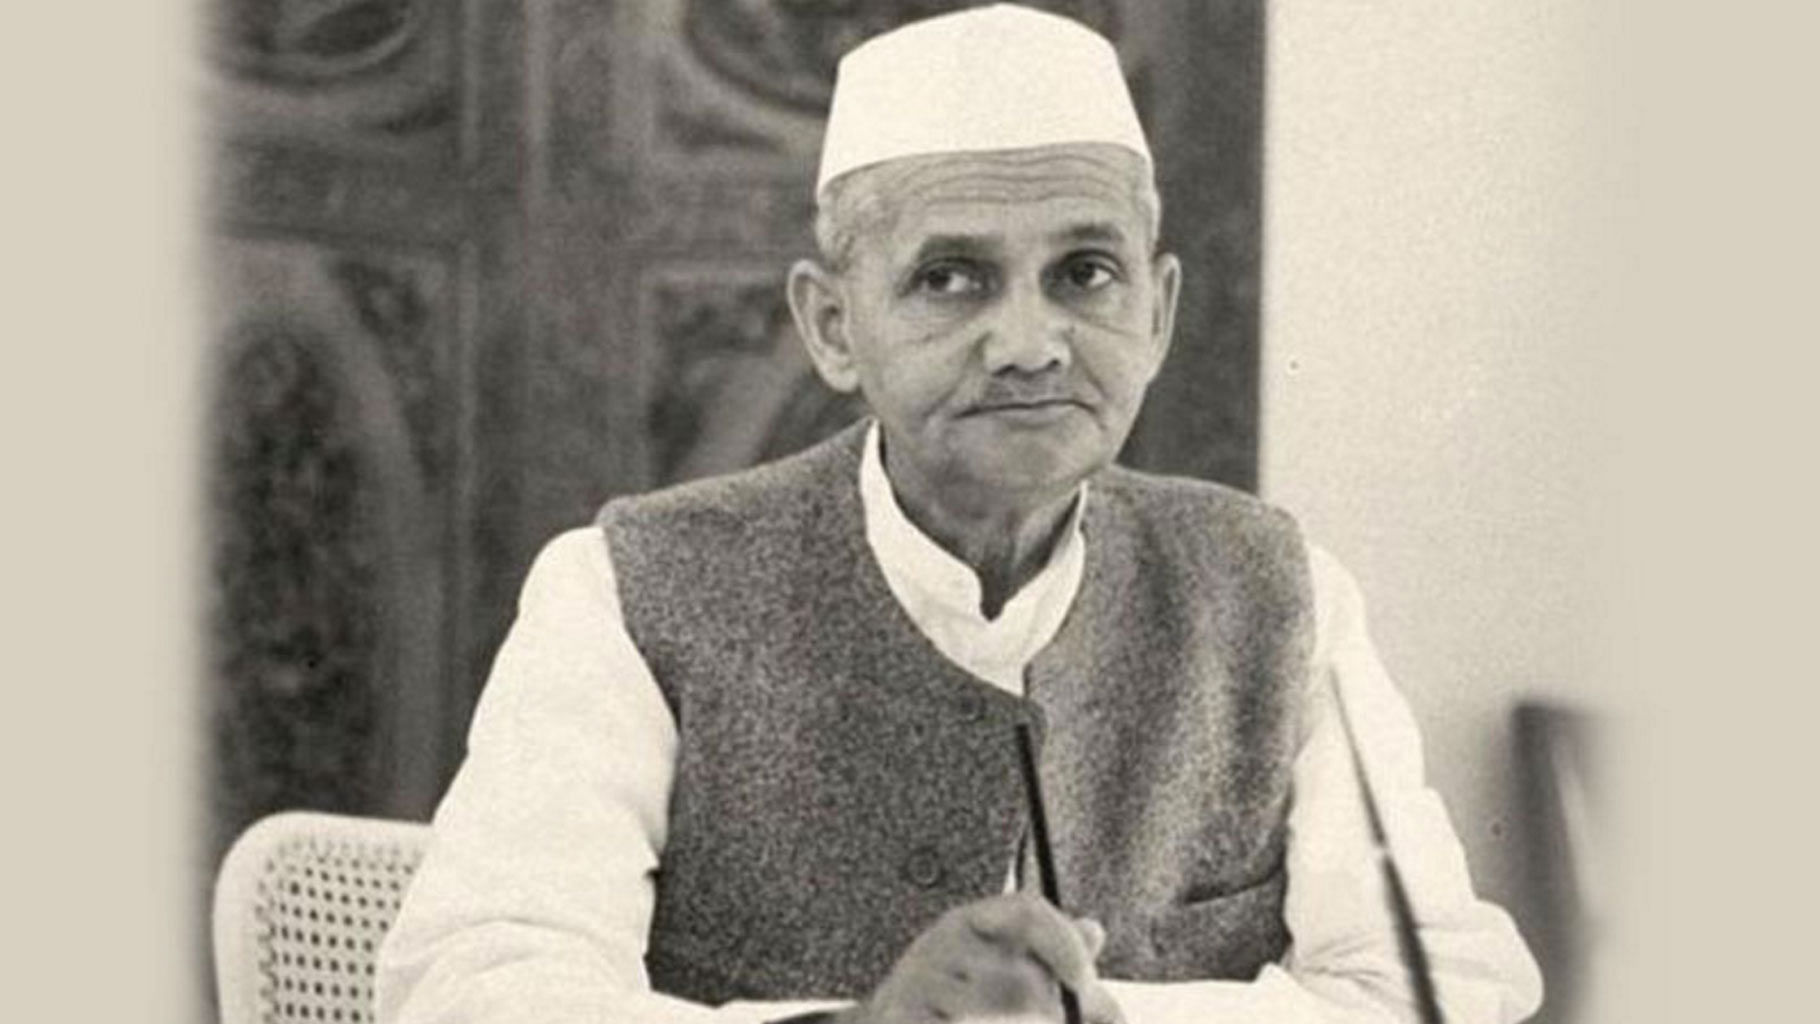 File photo of Lal Bahadur Shastri, former Prime Minister of India. (Photo Courtesy: <a href="http://pmindia.gov.in/wp-content/uploads/2015/10/lal-bahadur-shastri_2_oct_2015.jpg">PMO India Website</a>)